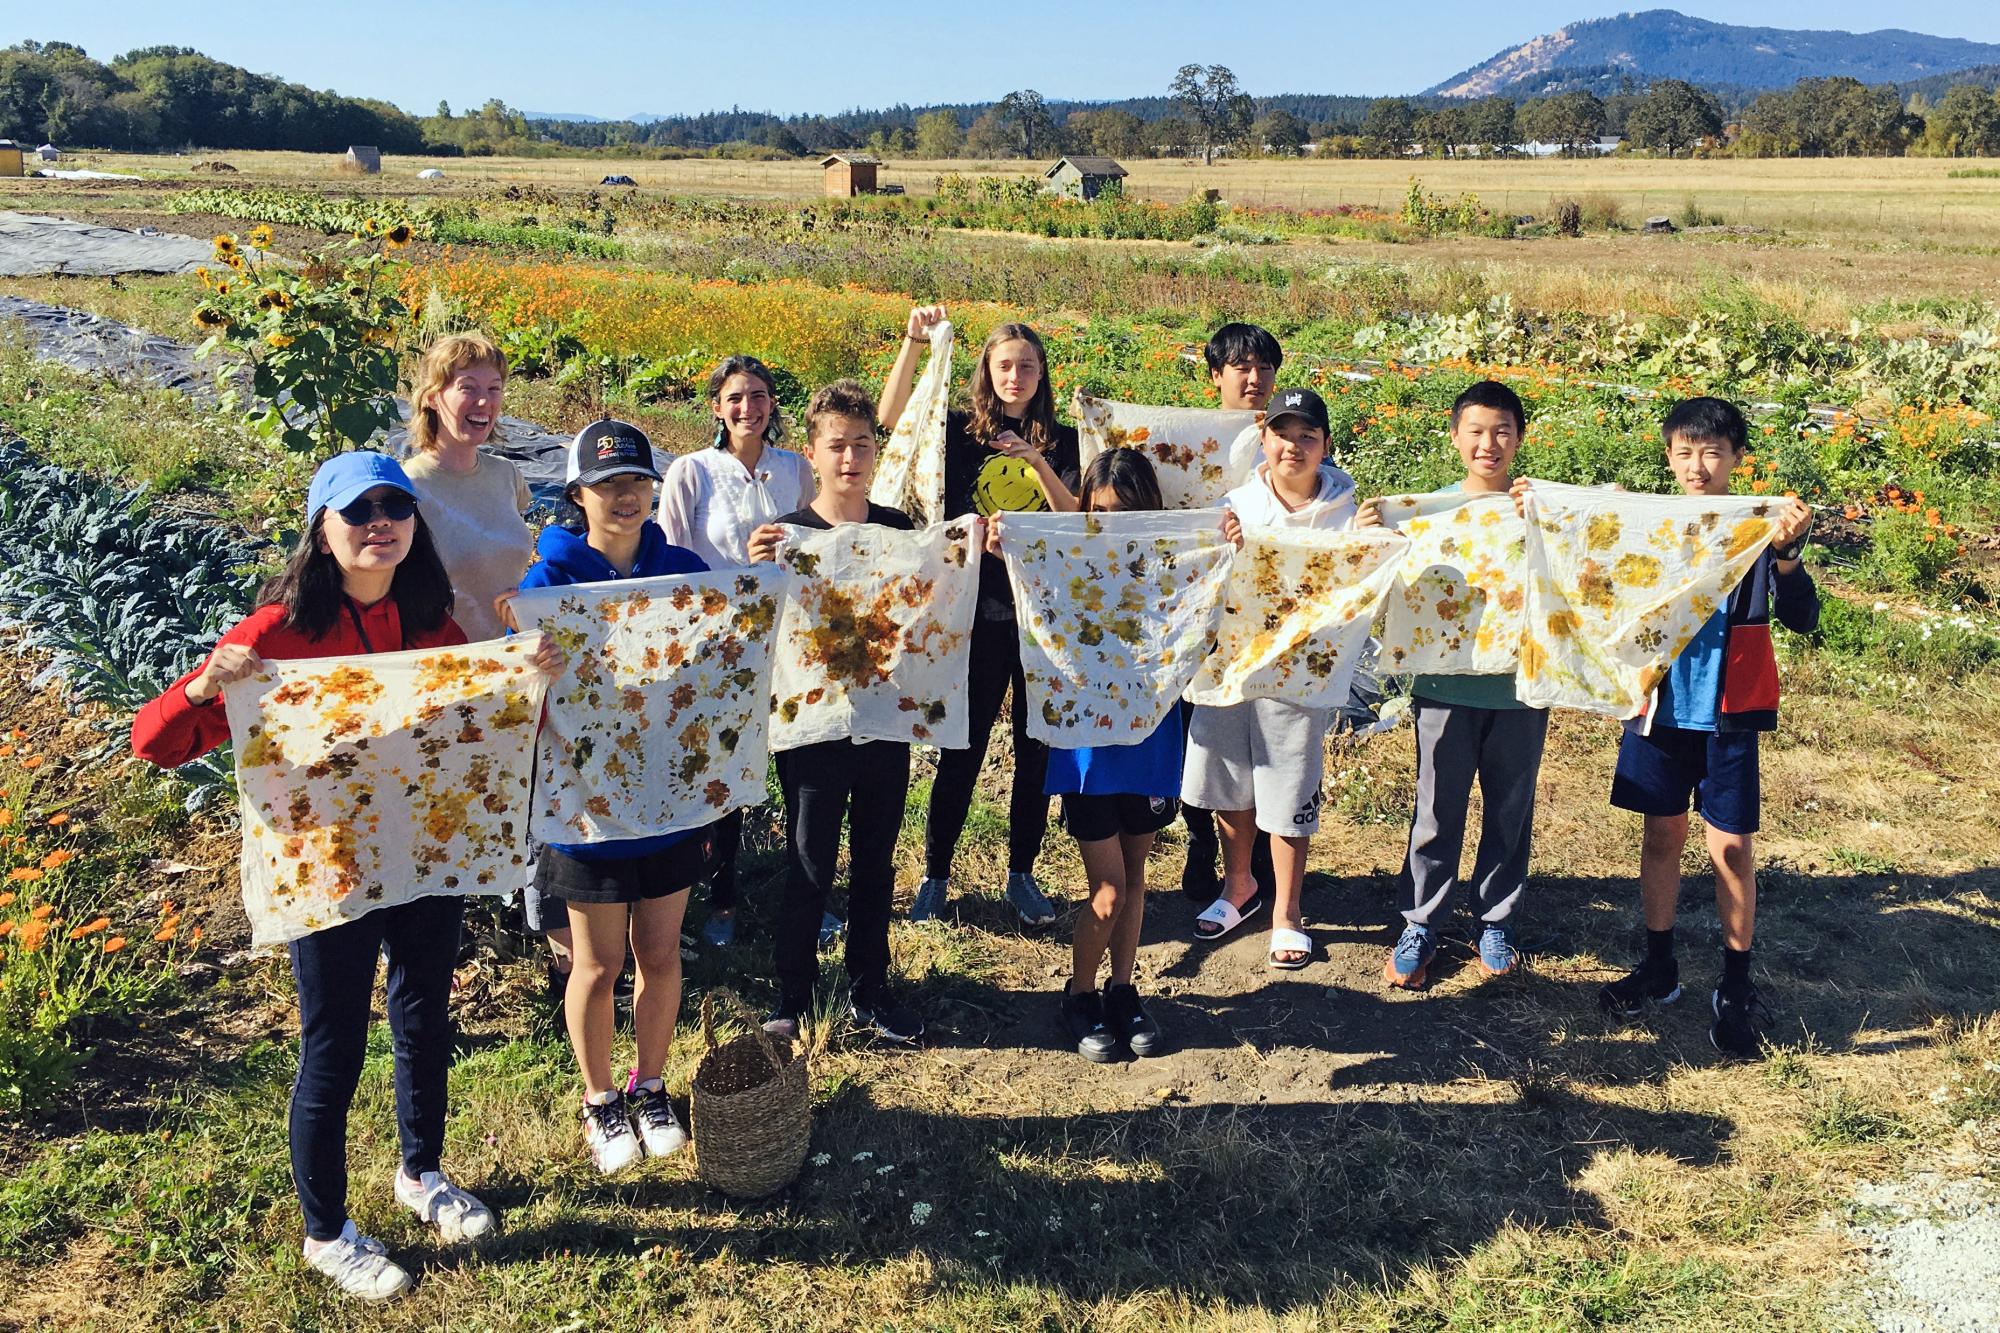 Grade 8 boarding students pose with their dyed fabrics during a group activity